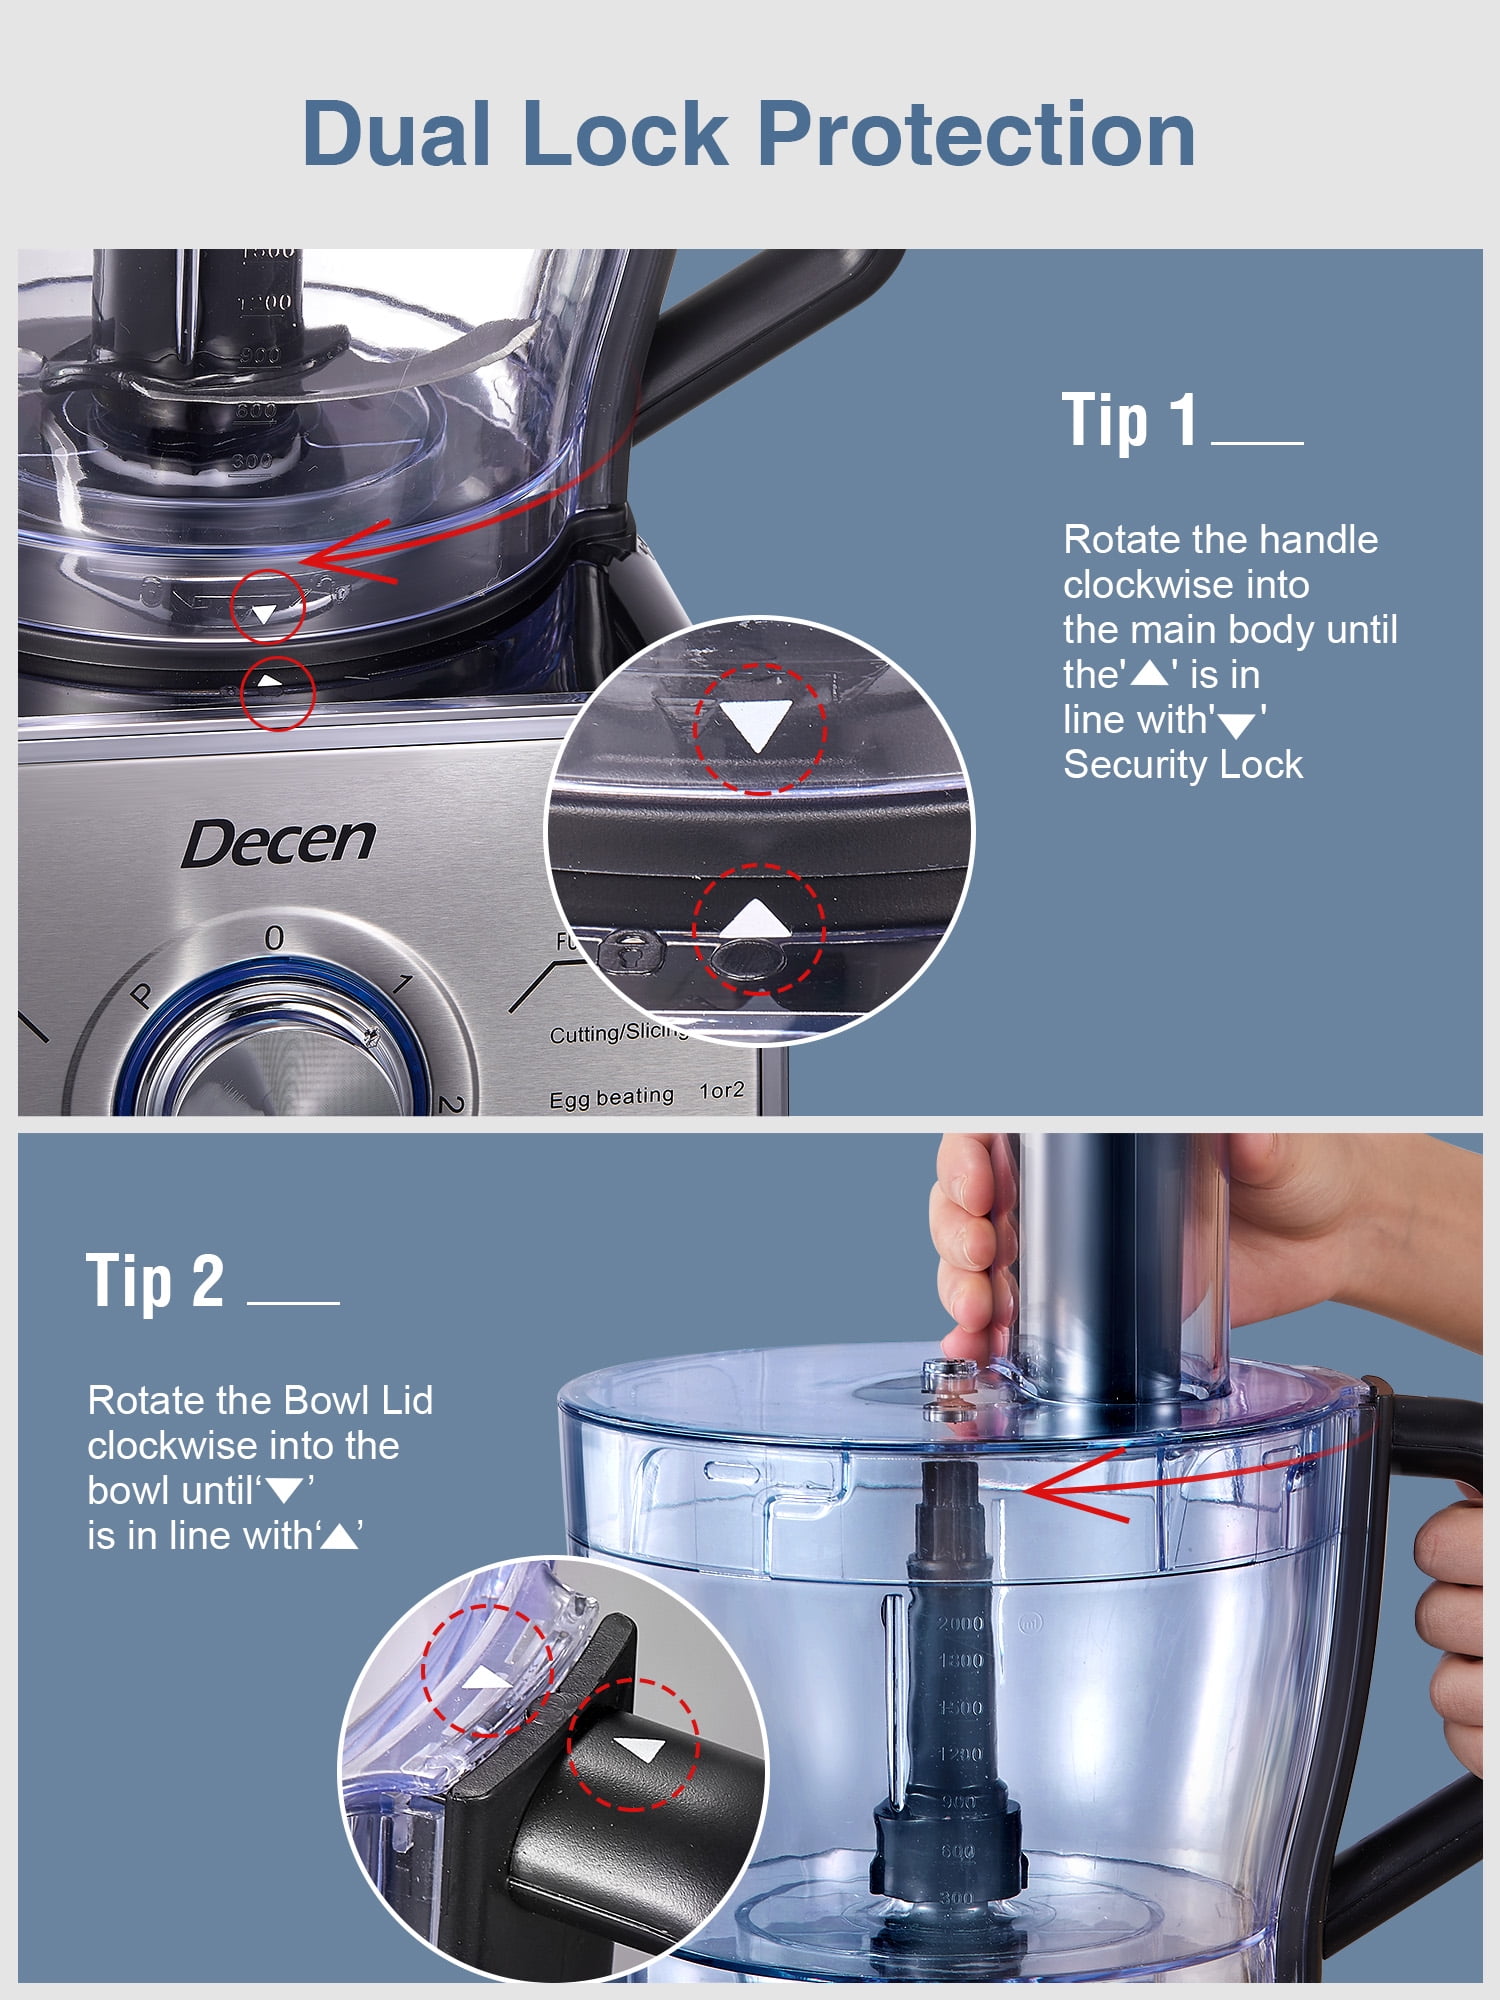 Check out my new favorite kitchen heller… the cup slicer! Save